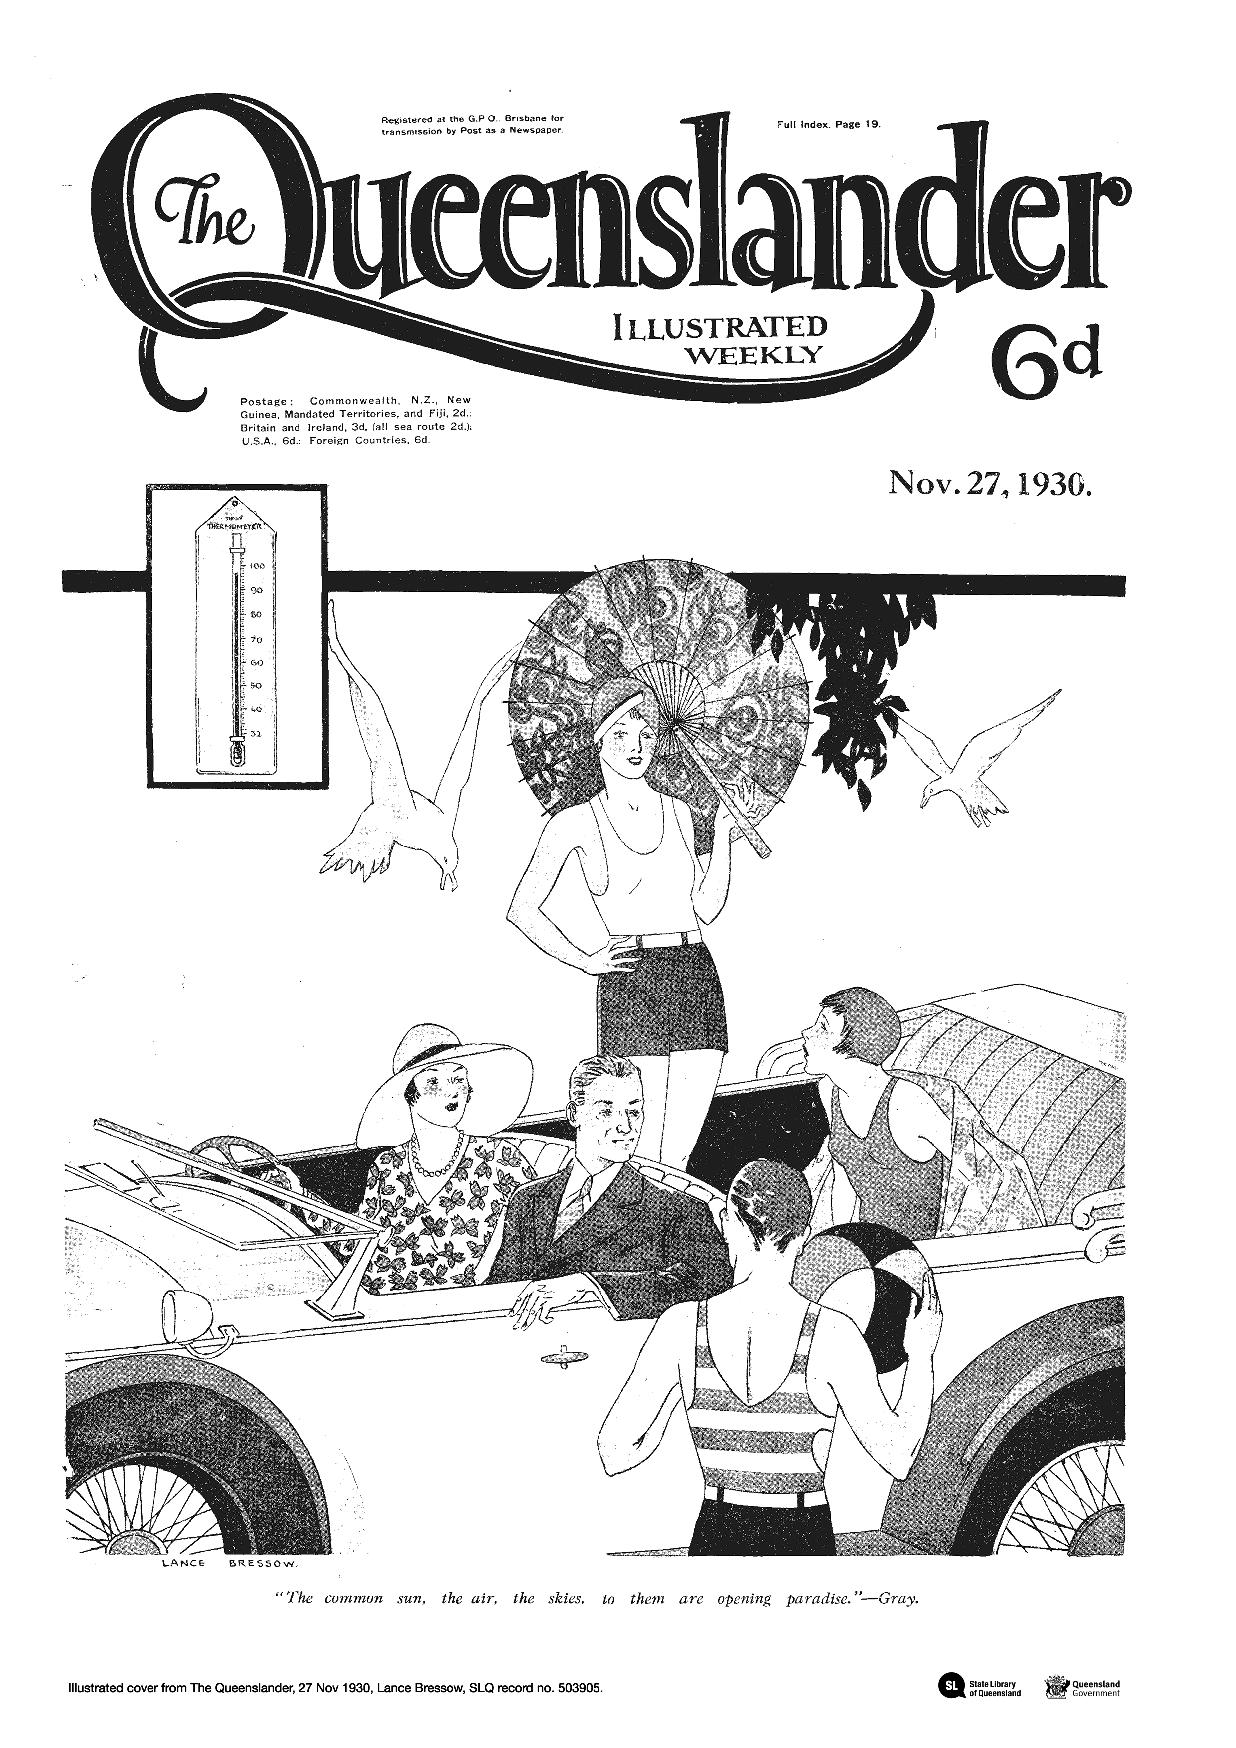 Front page cover of Illustrated Cover from The Queenslander 27 Nov 1930. The cover has a drawing one man and three ladies in a car and another person sanding outside the car holding a beach ball. 